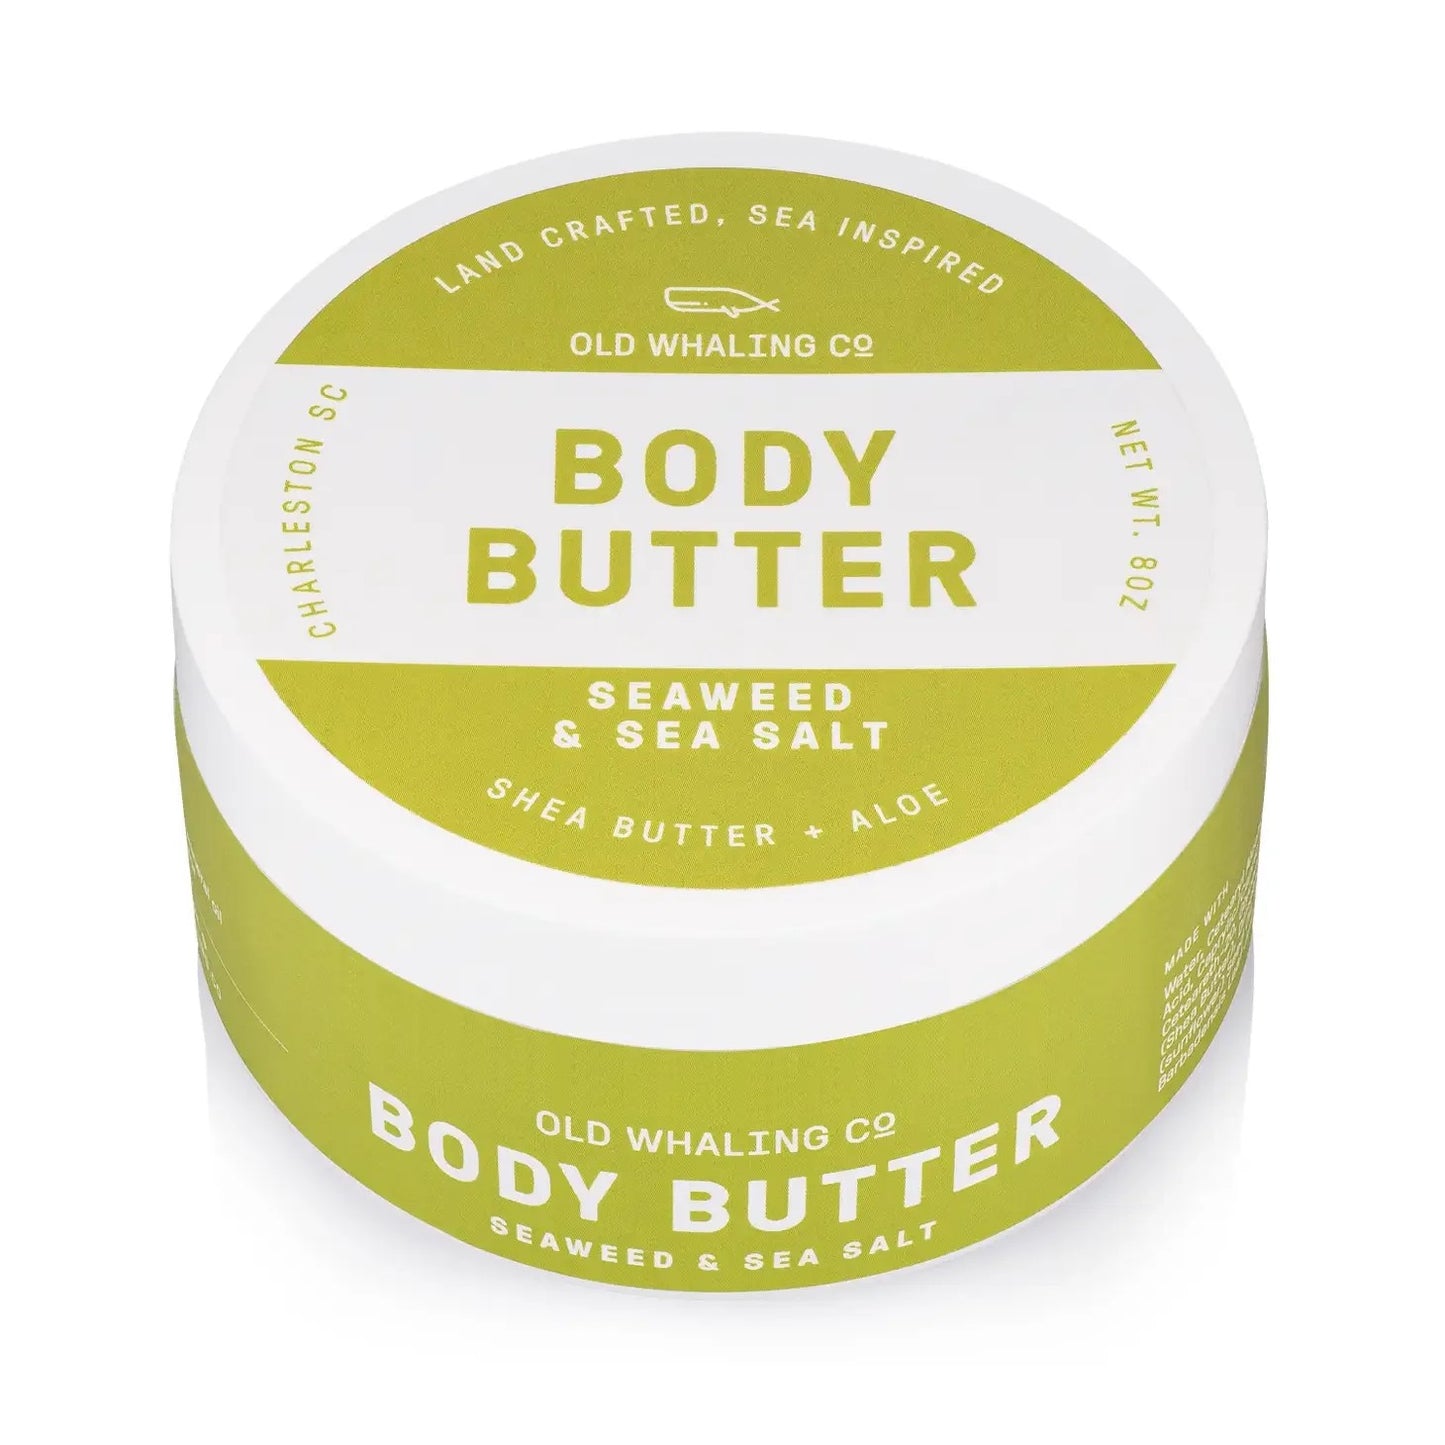 Picture of Seaweed & Sea Salt 8oz Body Butter